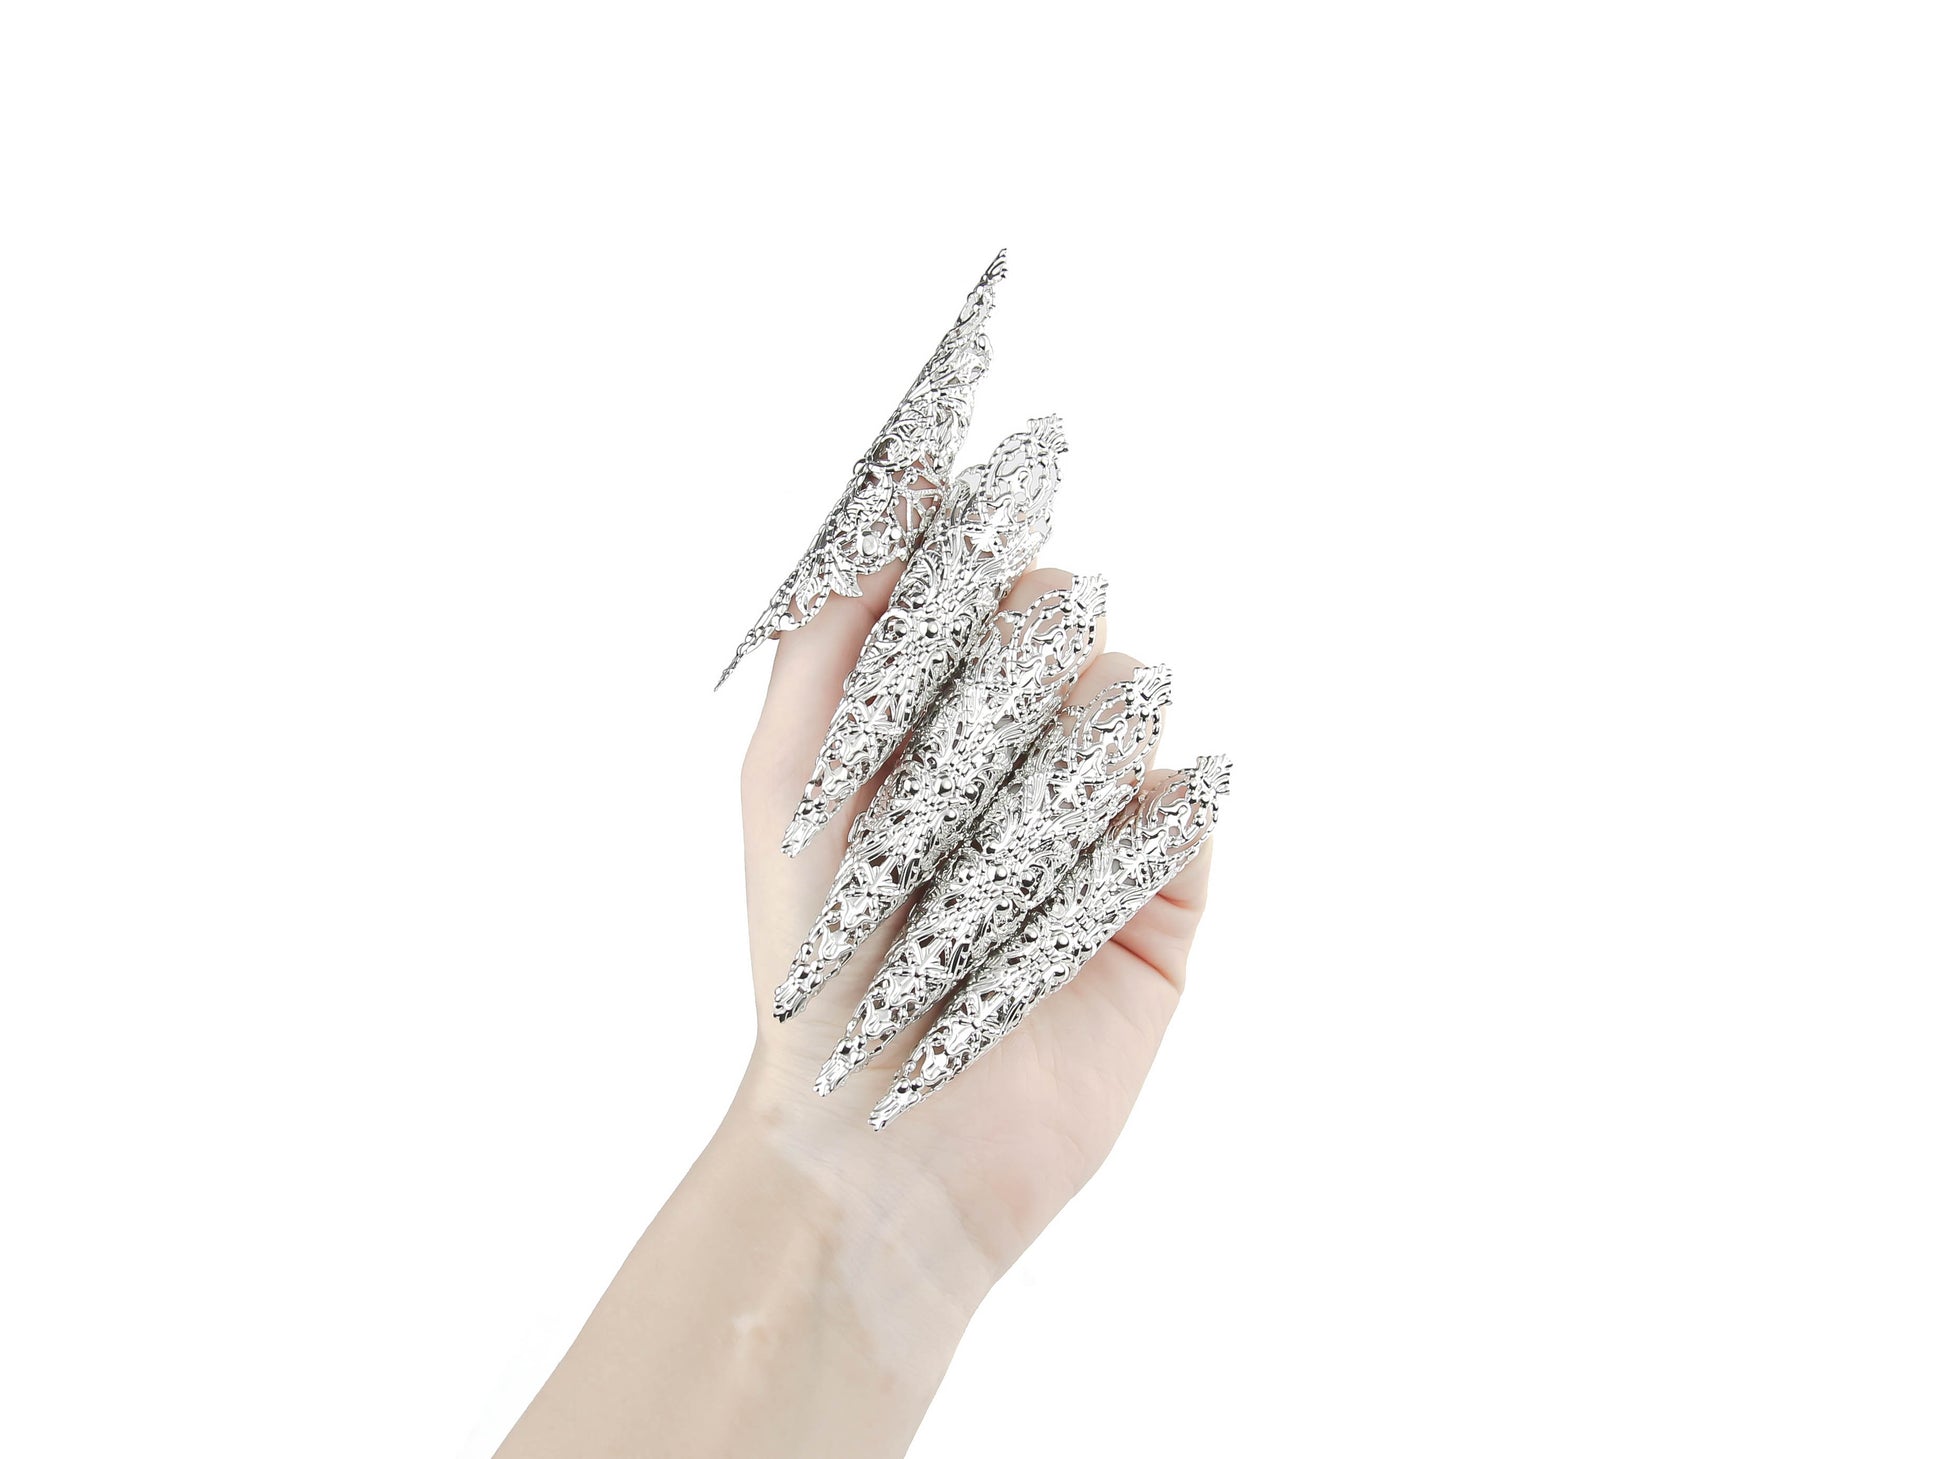 A hand models a full set of Myril Jewels' extra-long nail claws, exuding neo-gothic elegance. Designed for lovers of dark, avant-garde fashion, these claws are perfect for Halloween, punk looks, and witchcore enthusiasts. They make a bold statement for everyday wear, rave parties, and festivals, and are an unforgettable gift for the goth girlfriend.